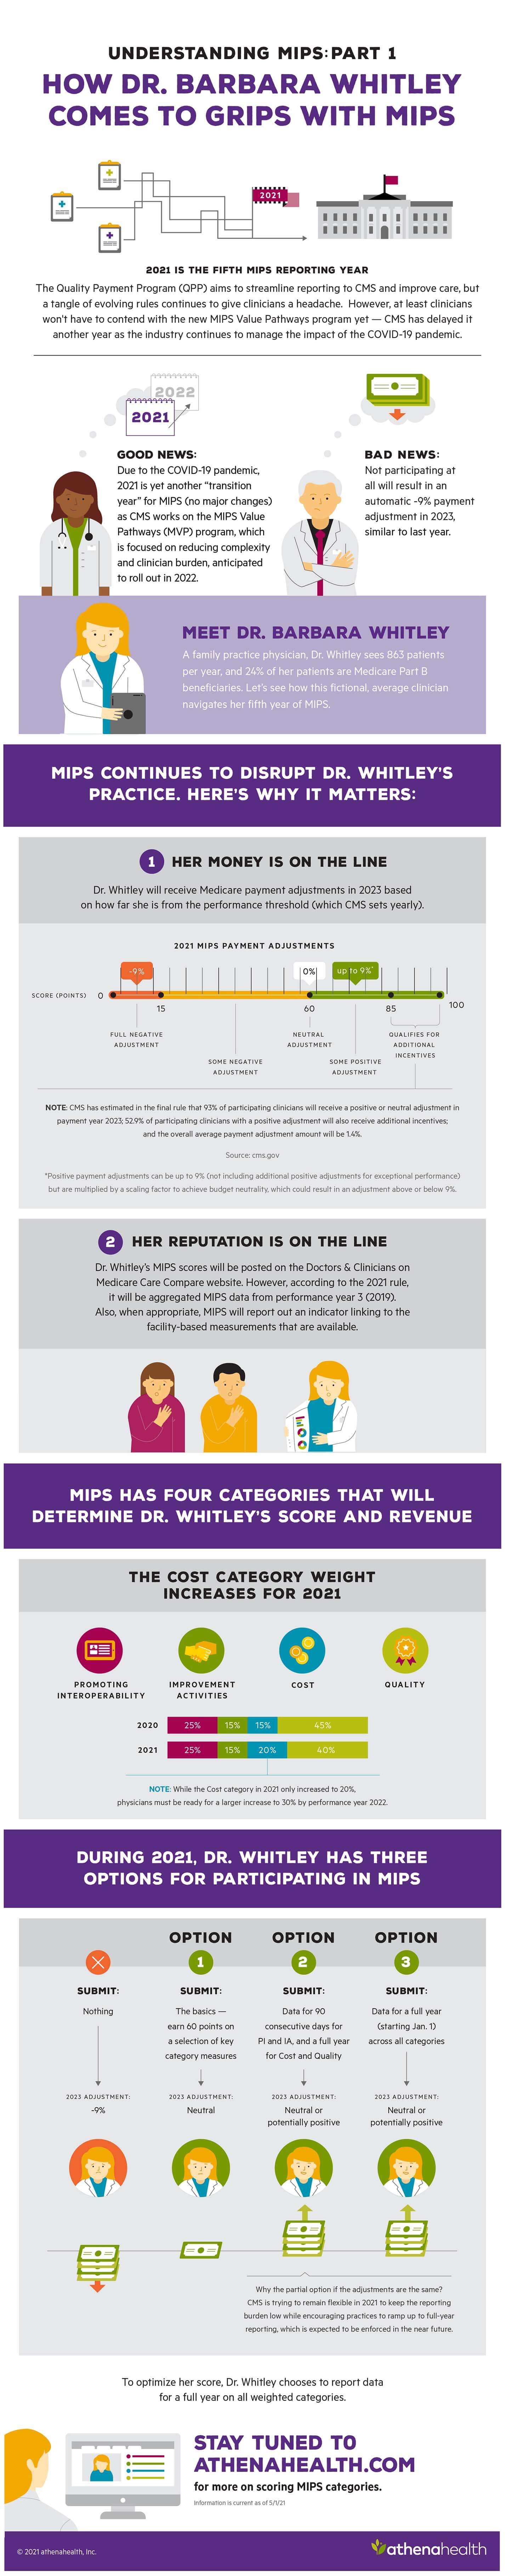 athenahealth infographic displaying the impact of MIPS evaluation on a medical practice